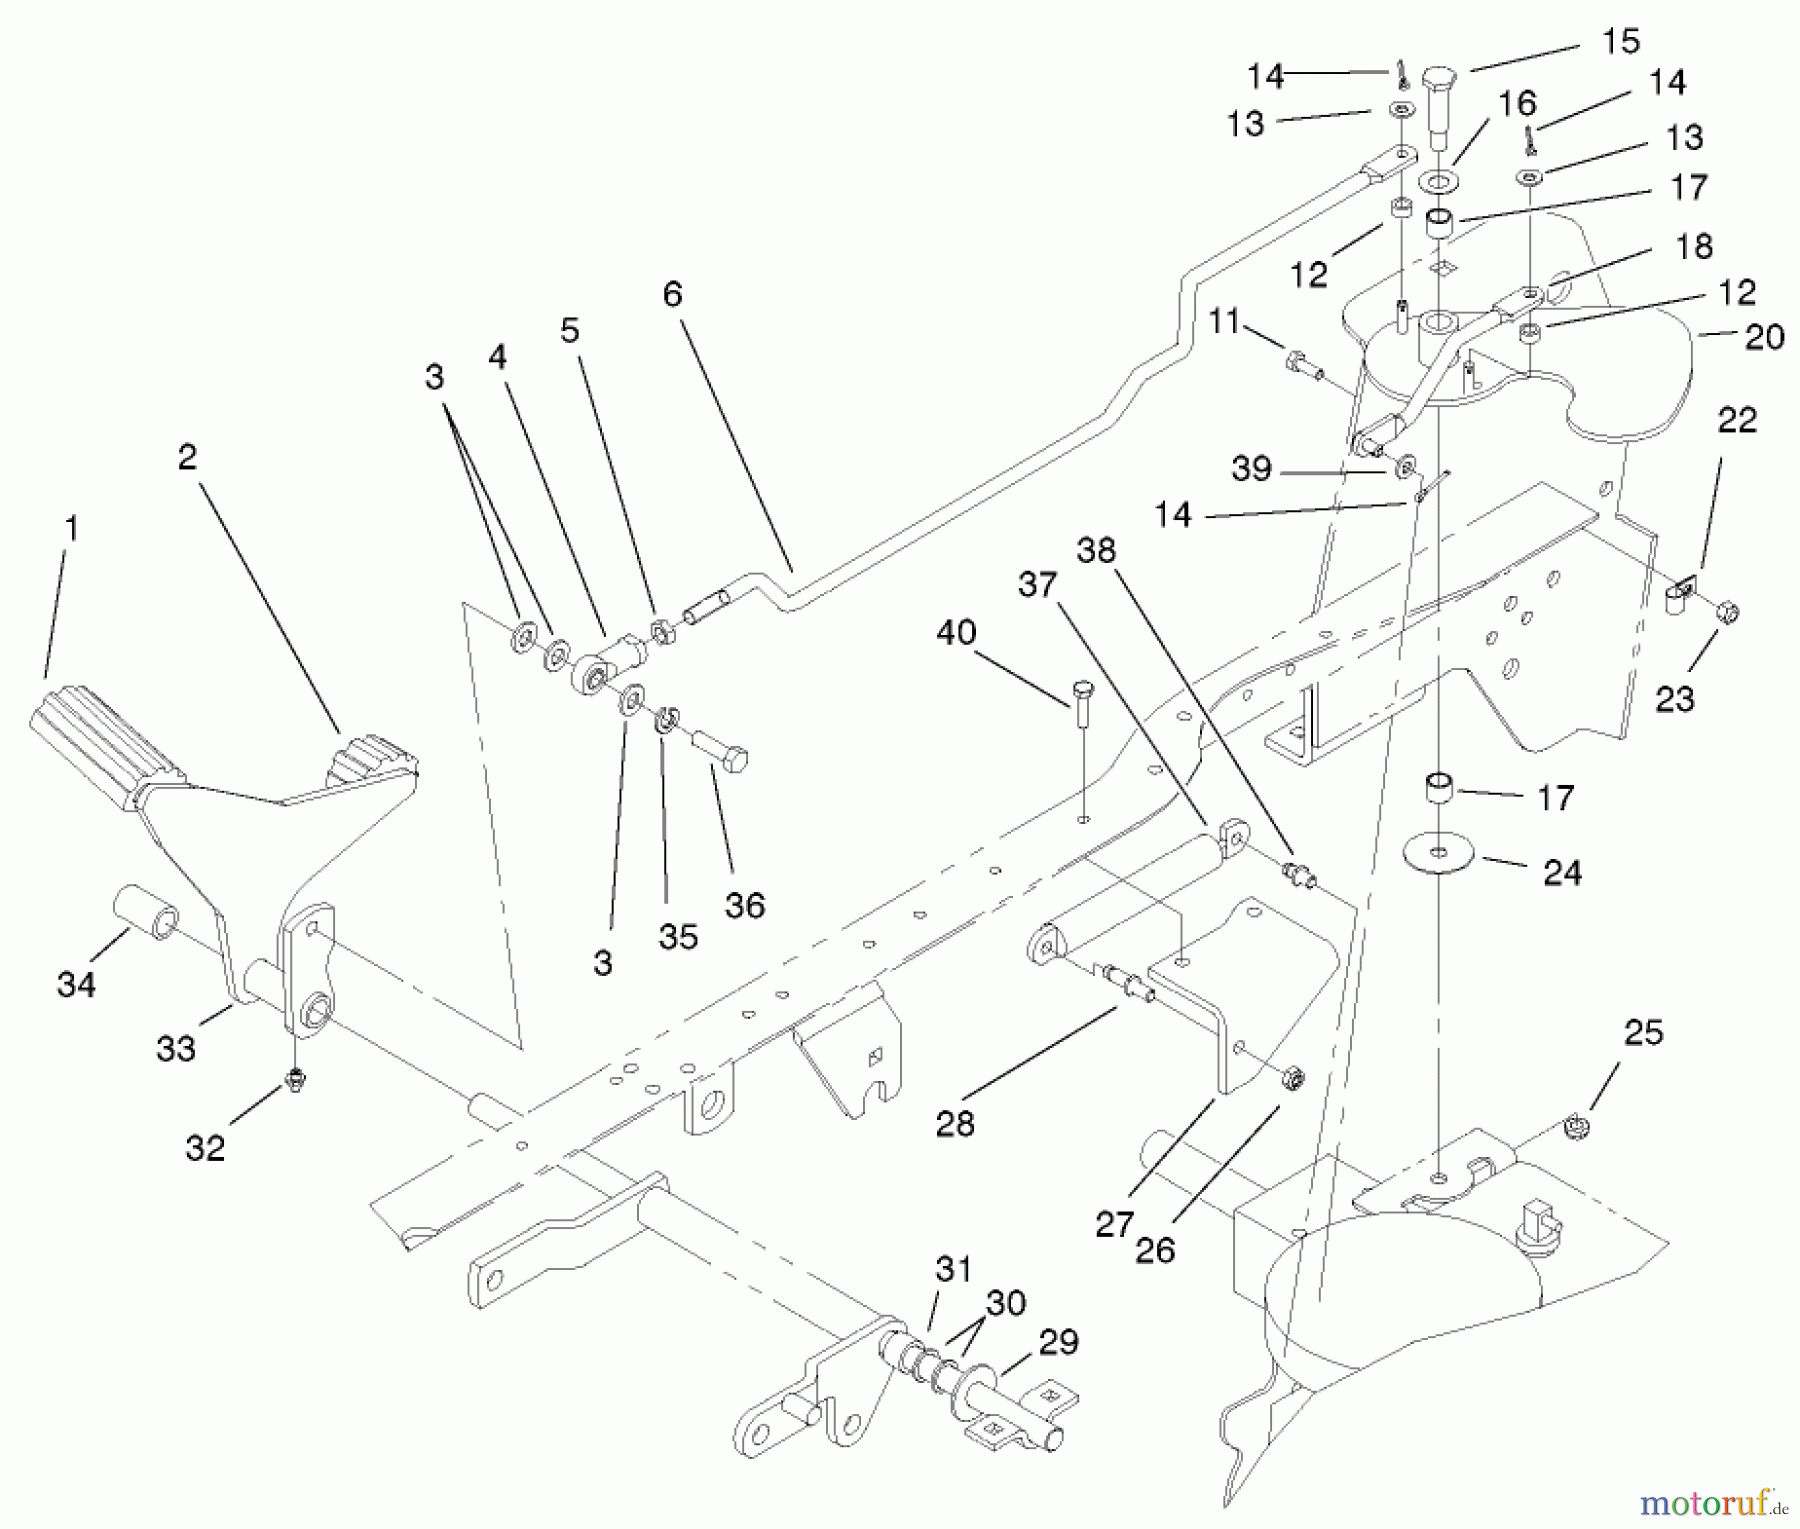  Toro Neu Mowers, Lawn & Garden Tractor Seite 1 72051 (265-H) - Toro 265-H Lawn and Garden Tractor, 2002 (220000001-220999999) HYDRAULIC CONTROLS ASSEMBLY